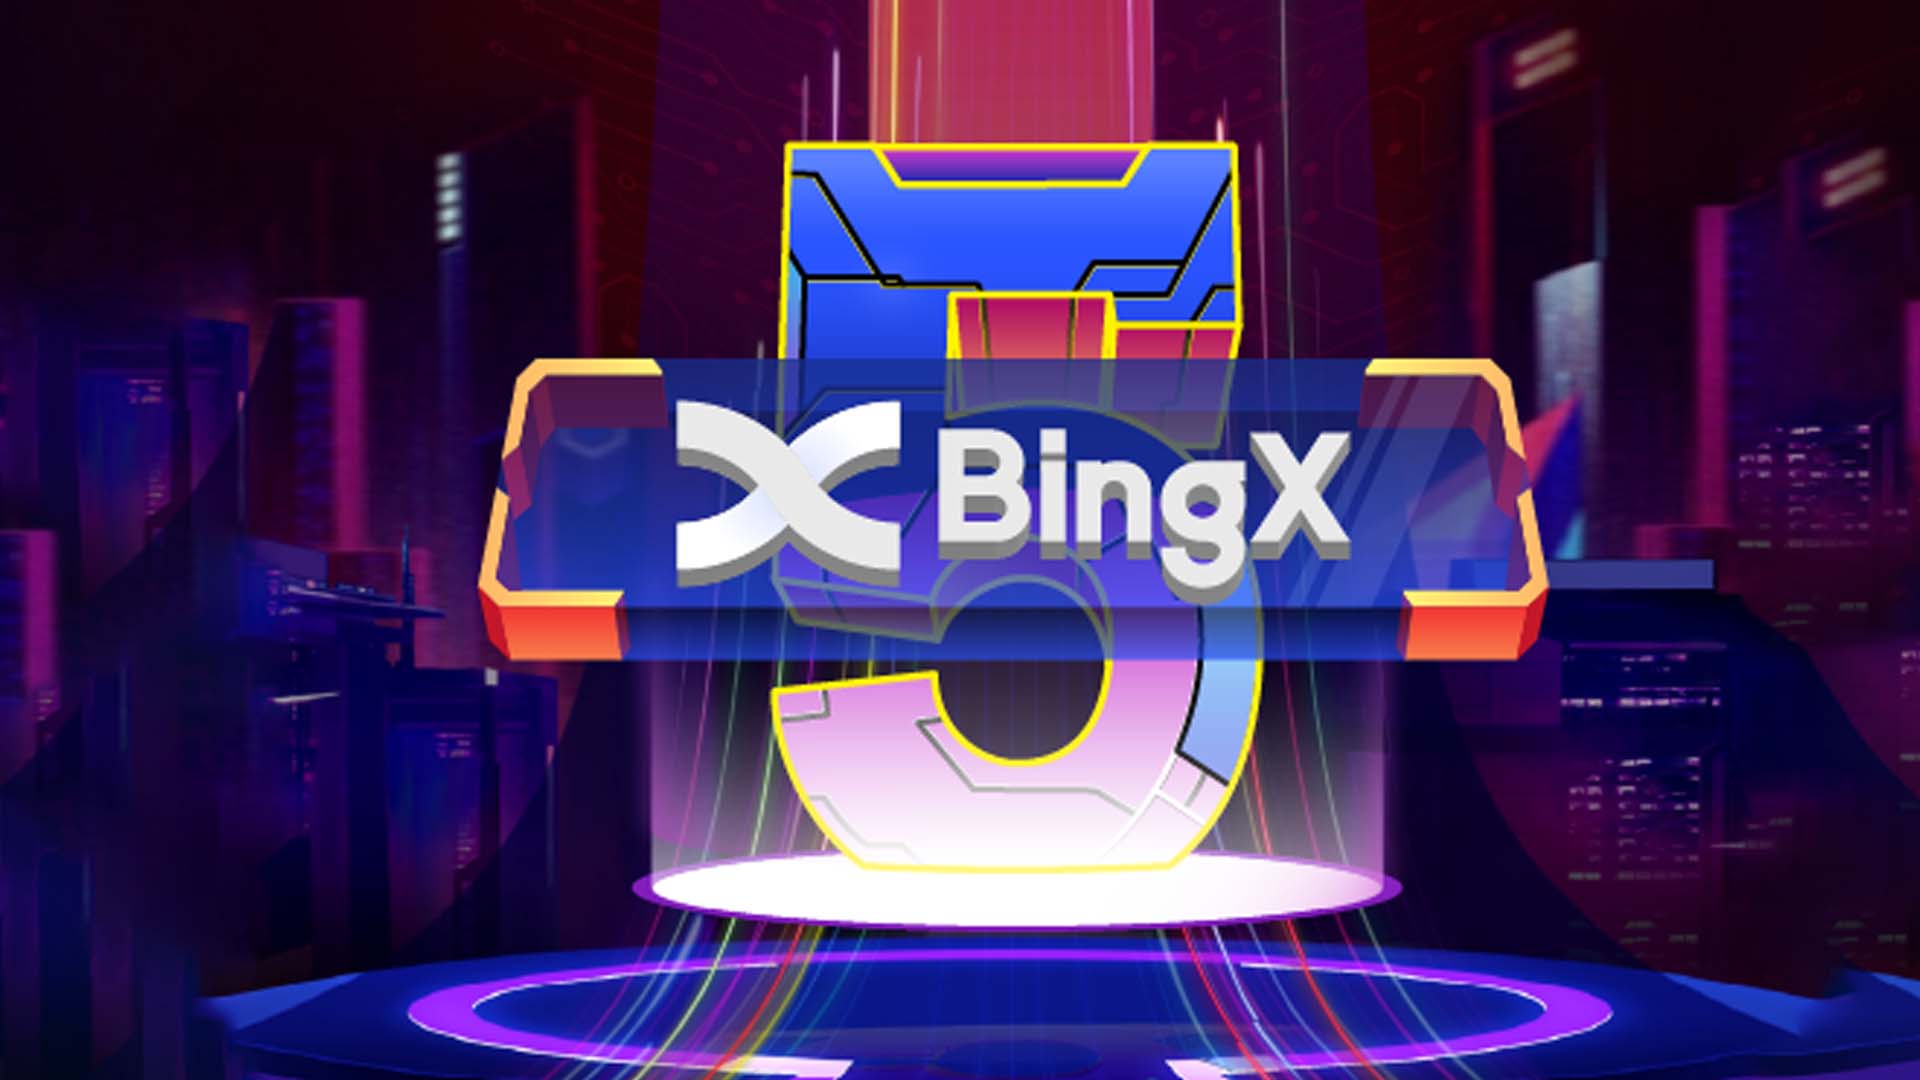 1 million USDT in prizes, 100 BTC and limited edition NFT rewards in the 5 years of BingX